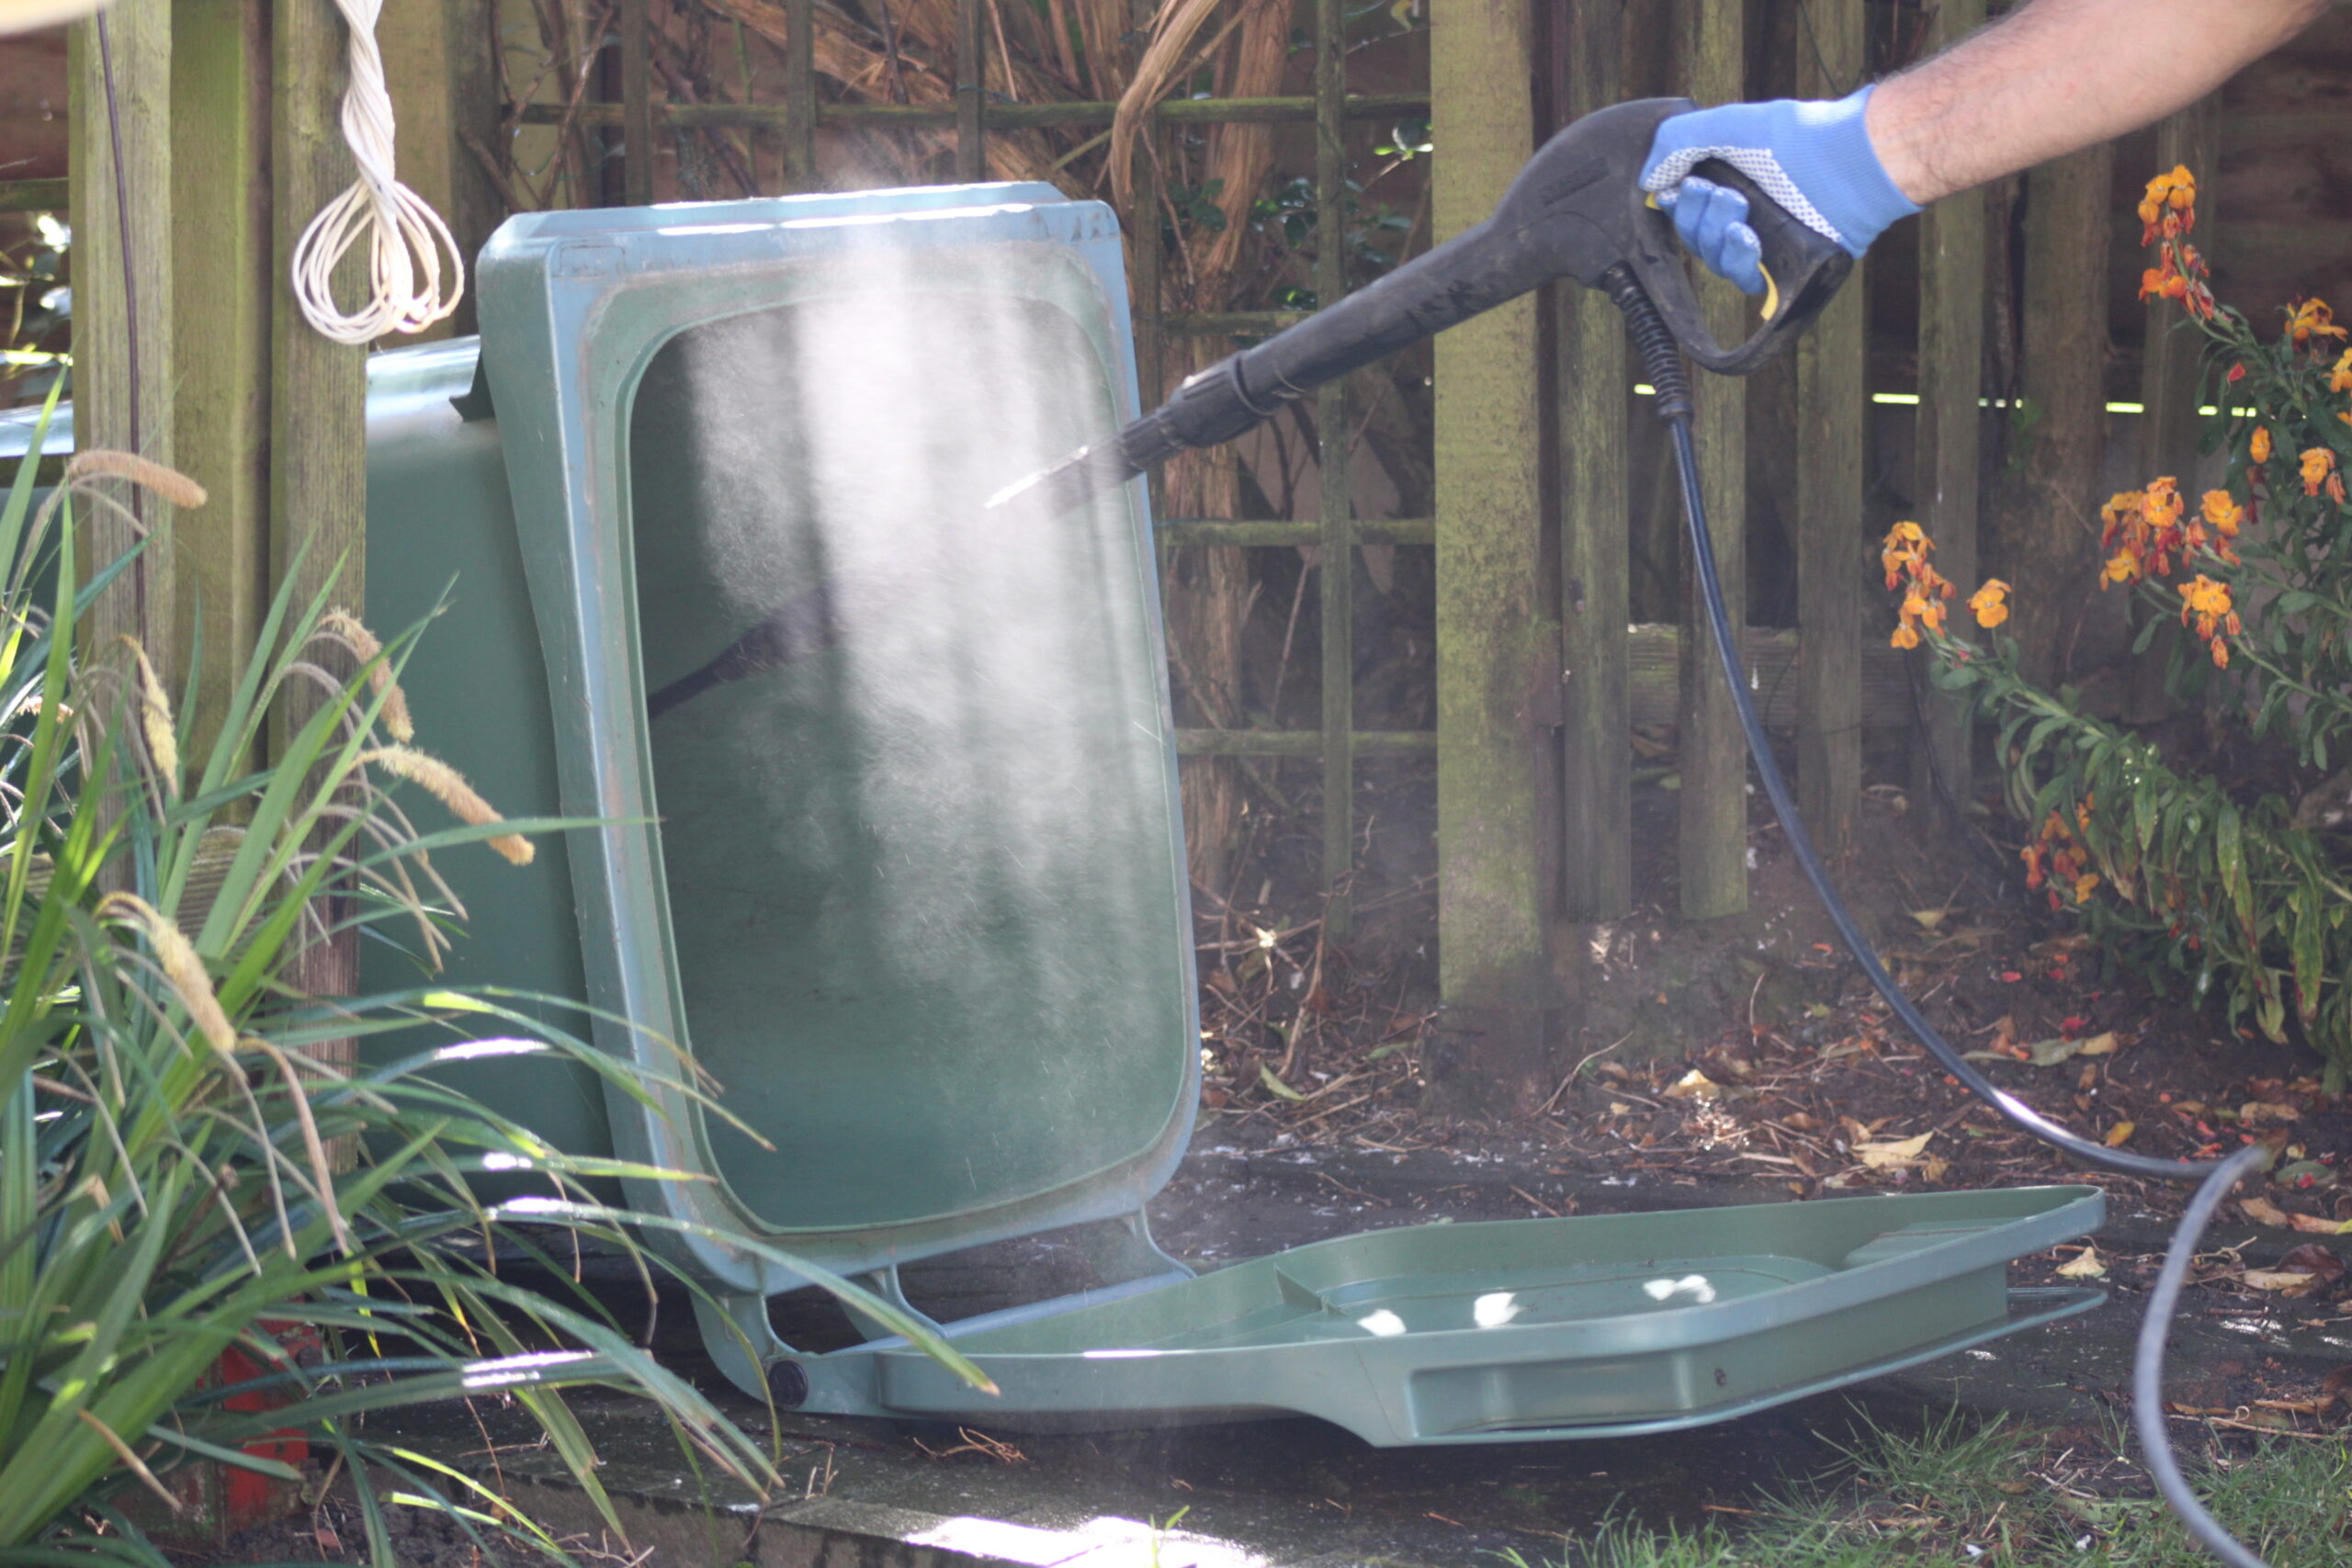 Garbage Can Cleaning - jet washing the wheely bin